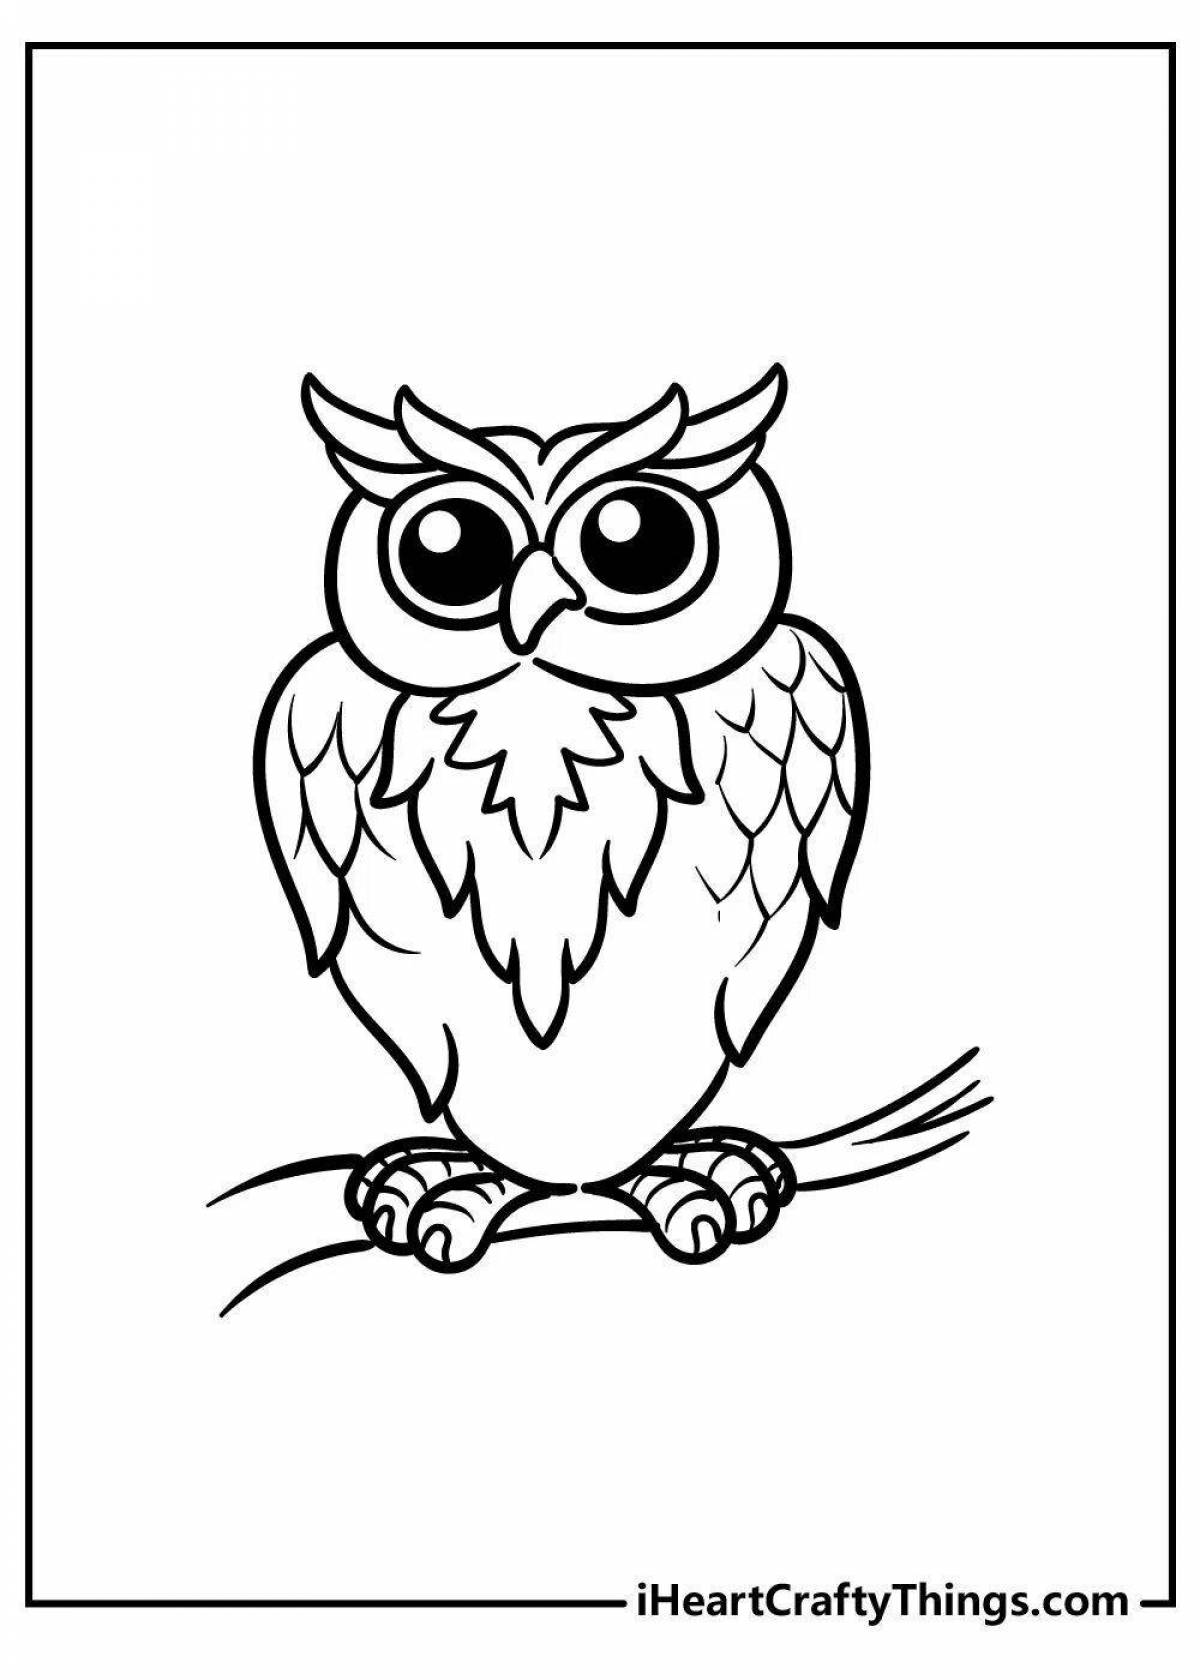 A funny owl coloring book for 3-4 year olds